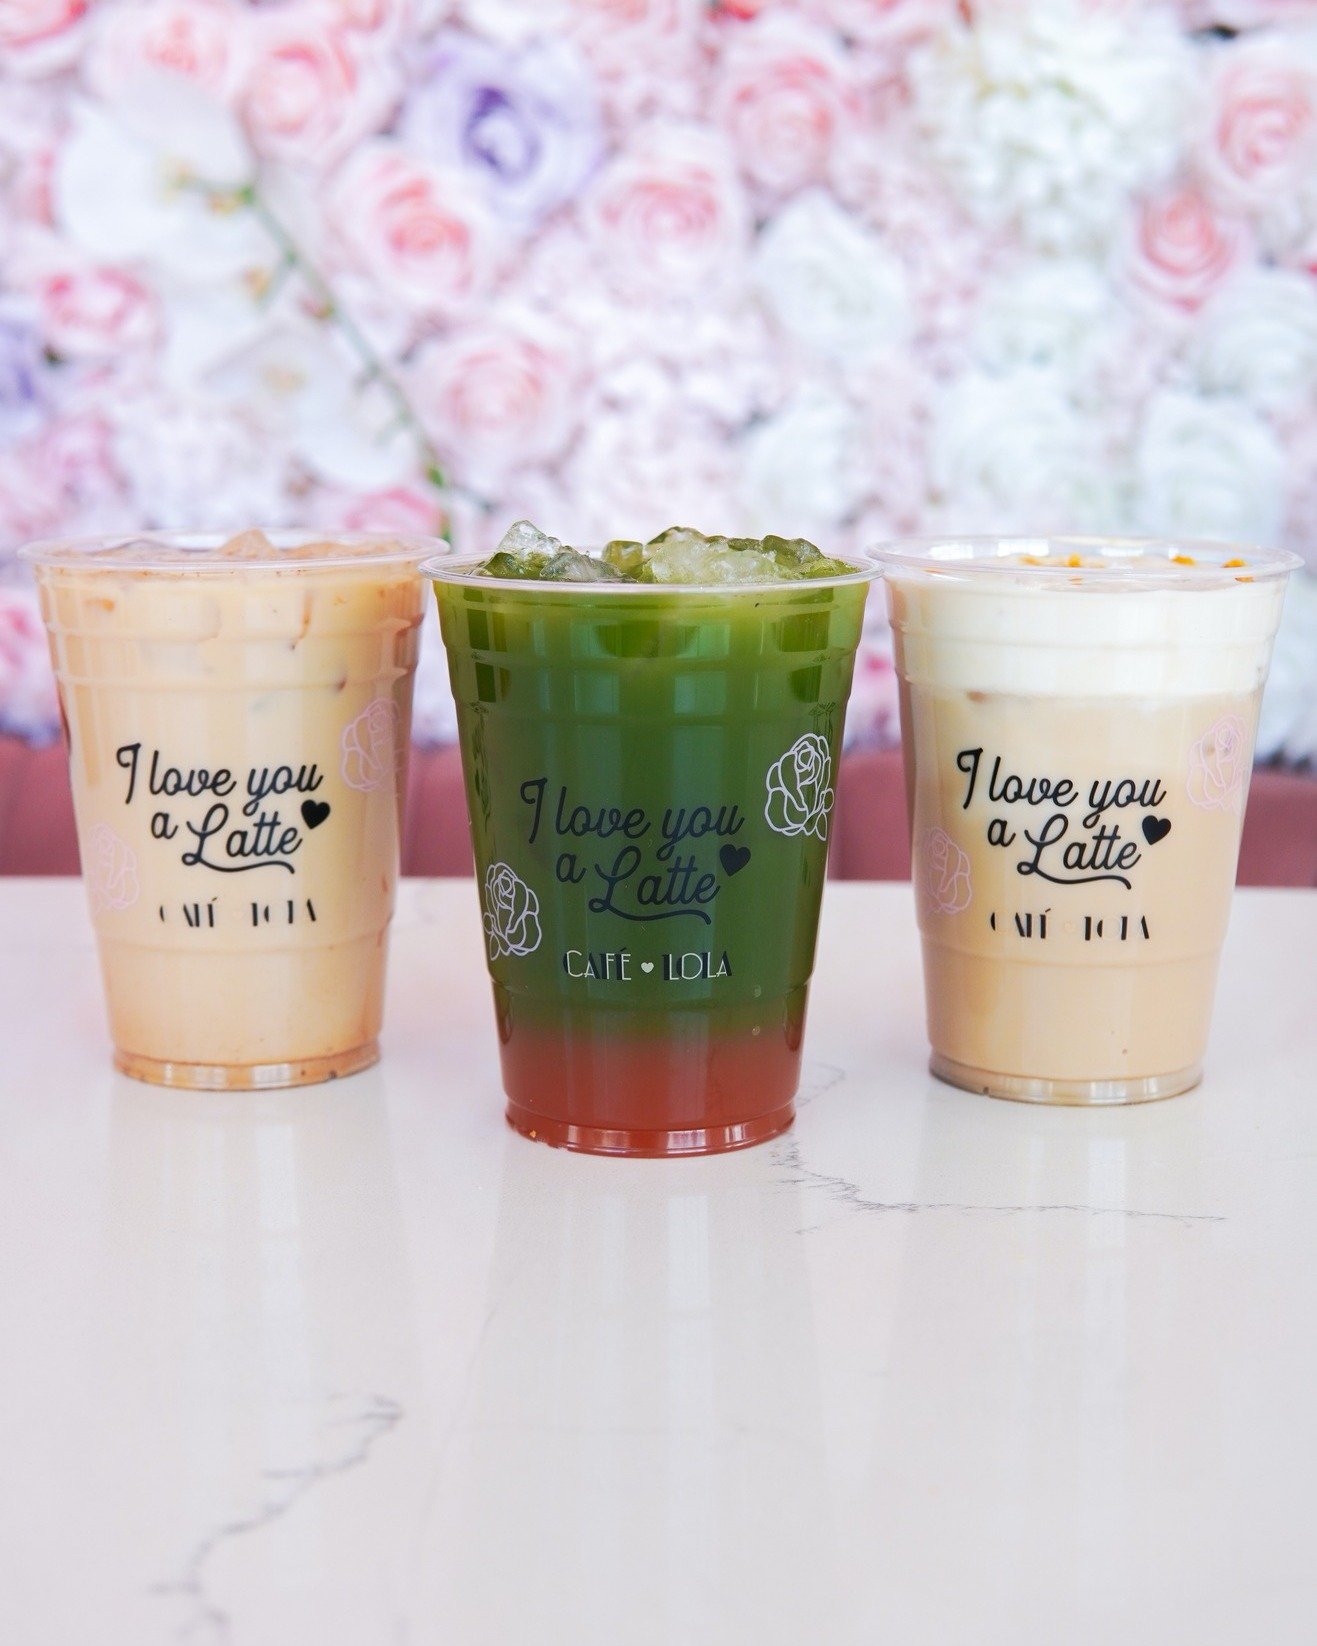 You can officially sip on our NEW Summer drinks starting tomorrow, May 1st! 🤩

🍯Honeycomb Latte: A vanilla &amp; honey latte, topped with cold foam, honey and honey comb crumbles.
🍮Dulce De Leche: Enjoy a fan favorite, cajeta-flavored latte blende